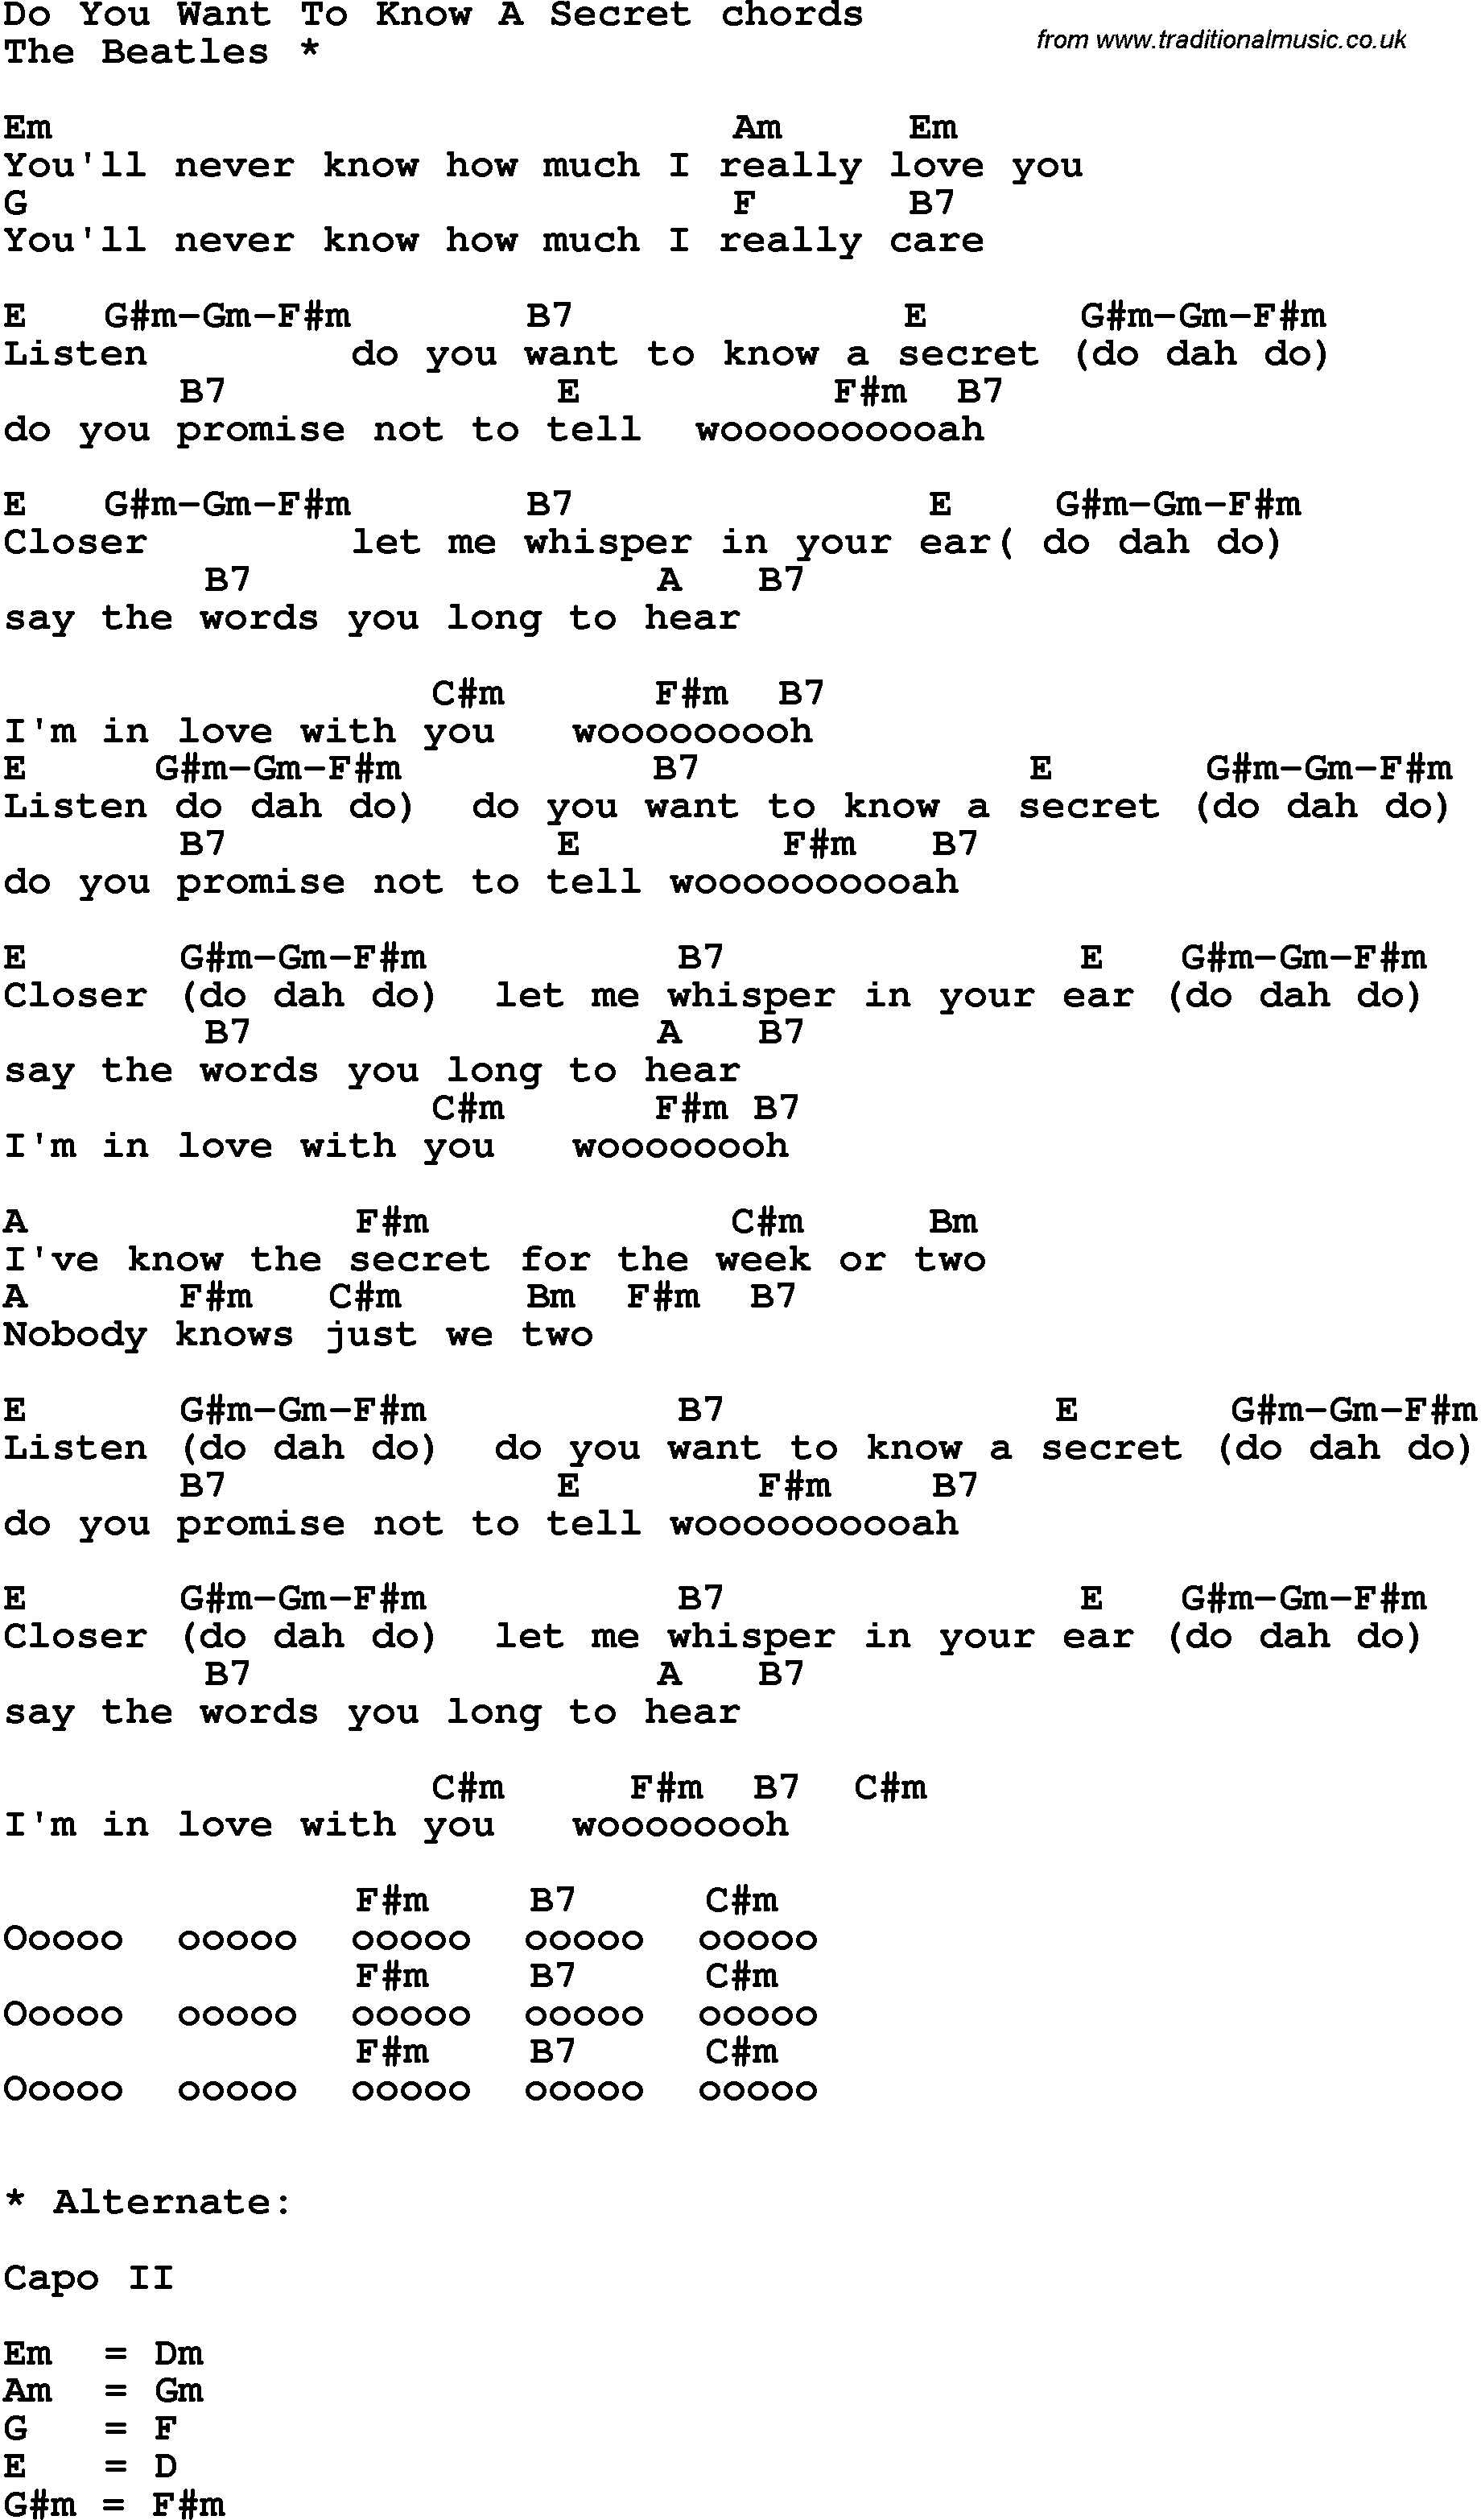 Song Lyrics with guitar chords for Do You Want To Know A Secret